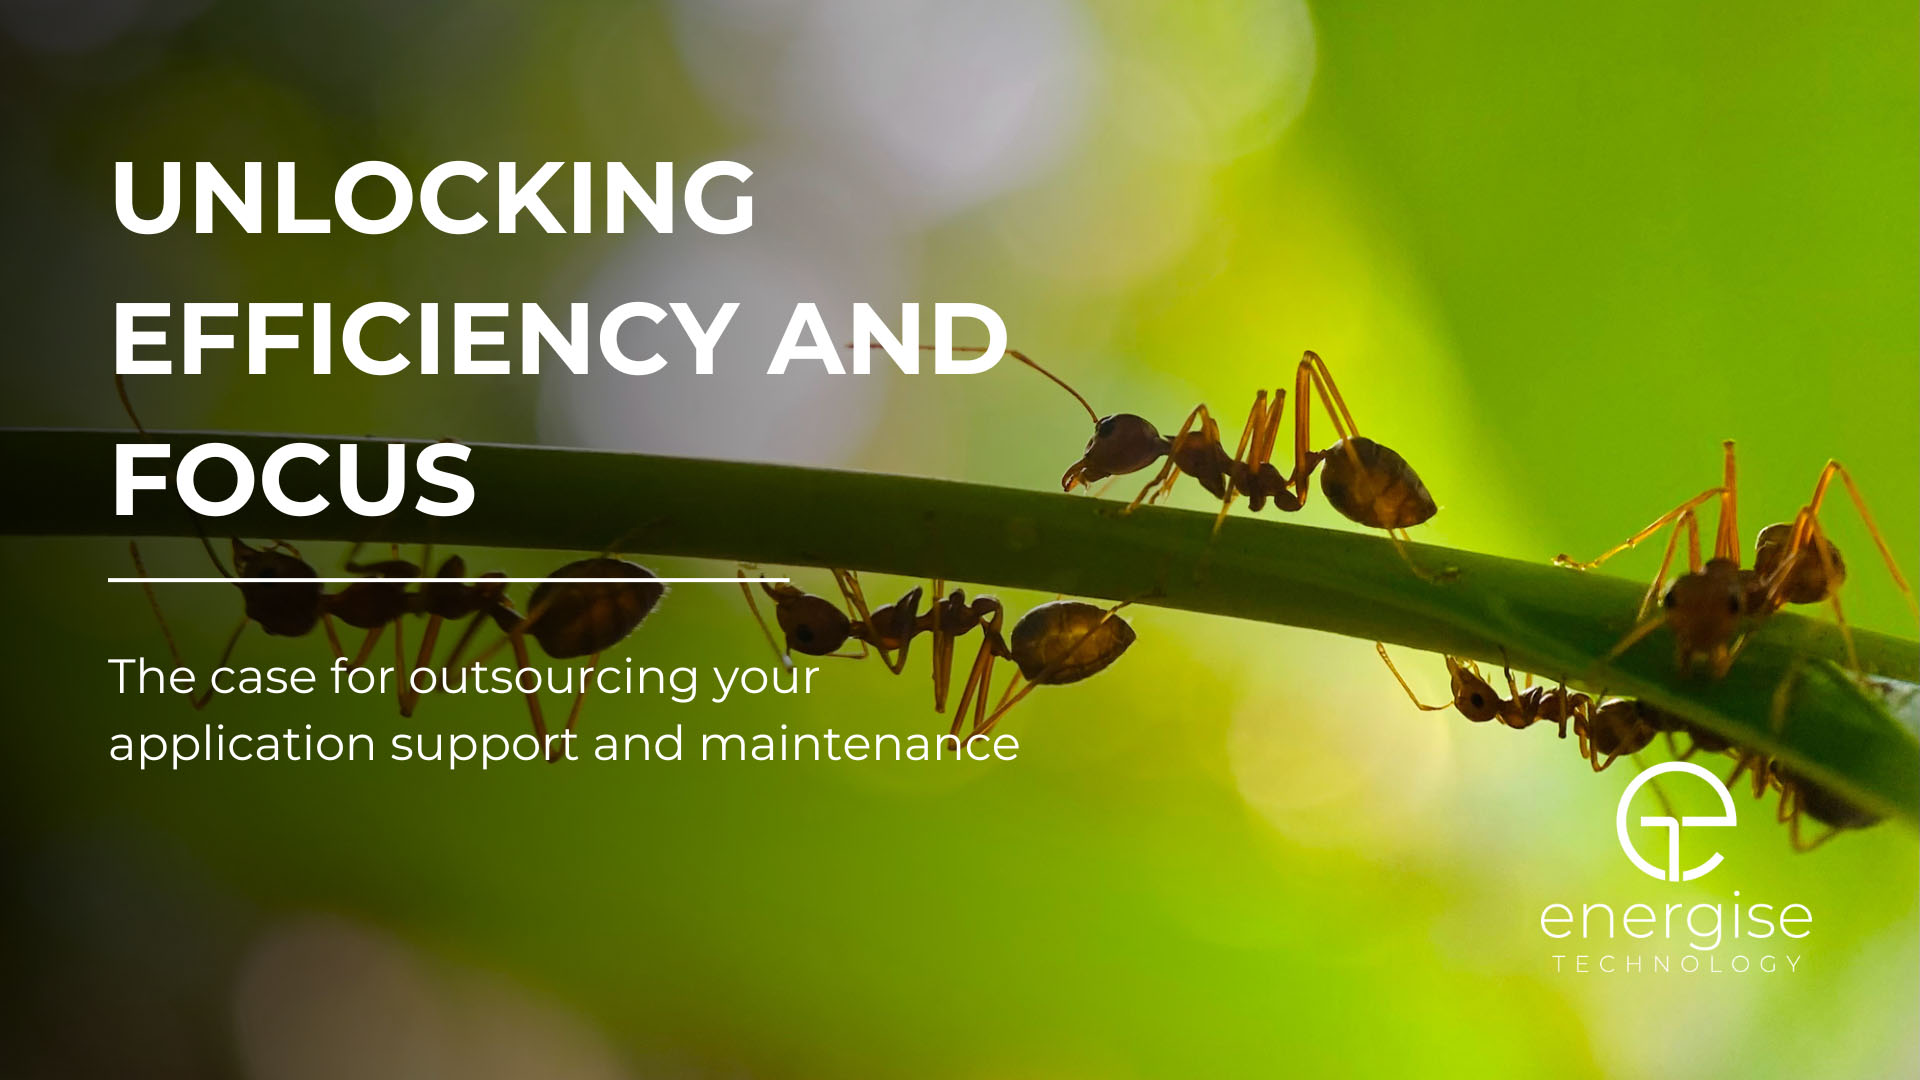 Unlocking efficiency & focus: The case for outsourcing your application support and maintenance